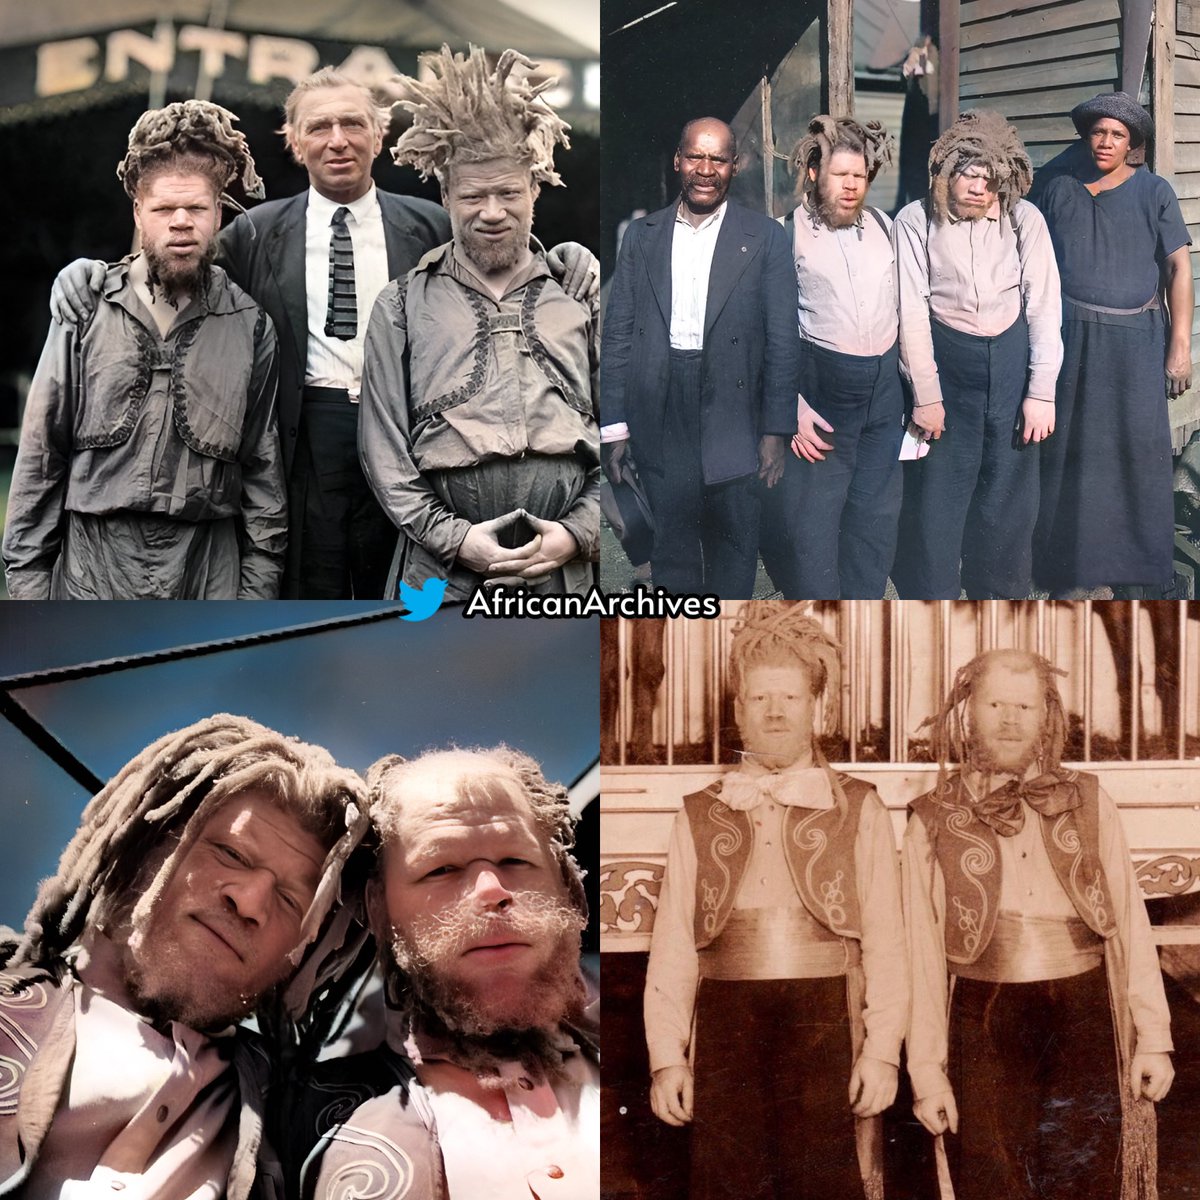 These are the Muse Brothers. Their biological names are George and Willie Muse. They were two albino brothers; In 1899 they were kidnapped as boys in Truevine, Virginia by bounty hunters and were forced into the circus, labeled as “freak show” performers. Their owners showcased